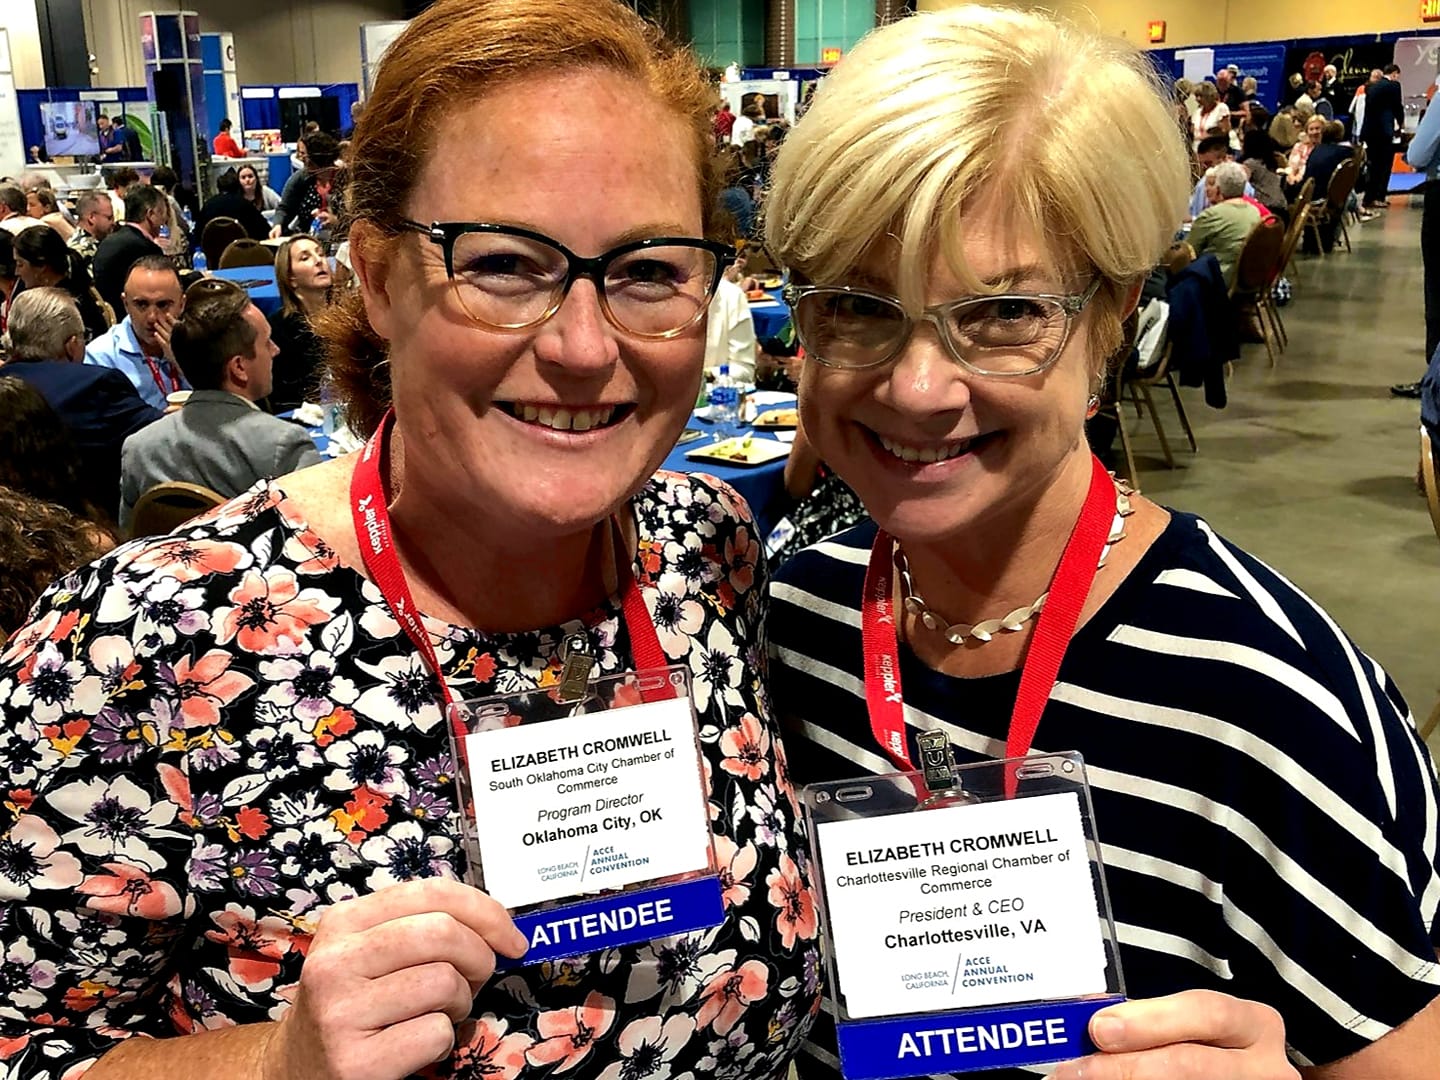 Elizabeth Cromwell (Charlottesville) meets Elizabeth Cromwell (Oklahoma City) at #ACCE2019